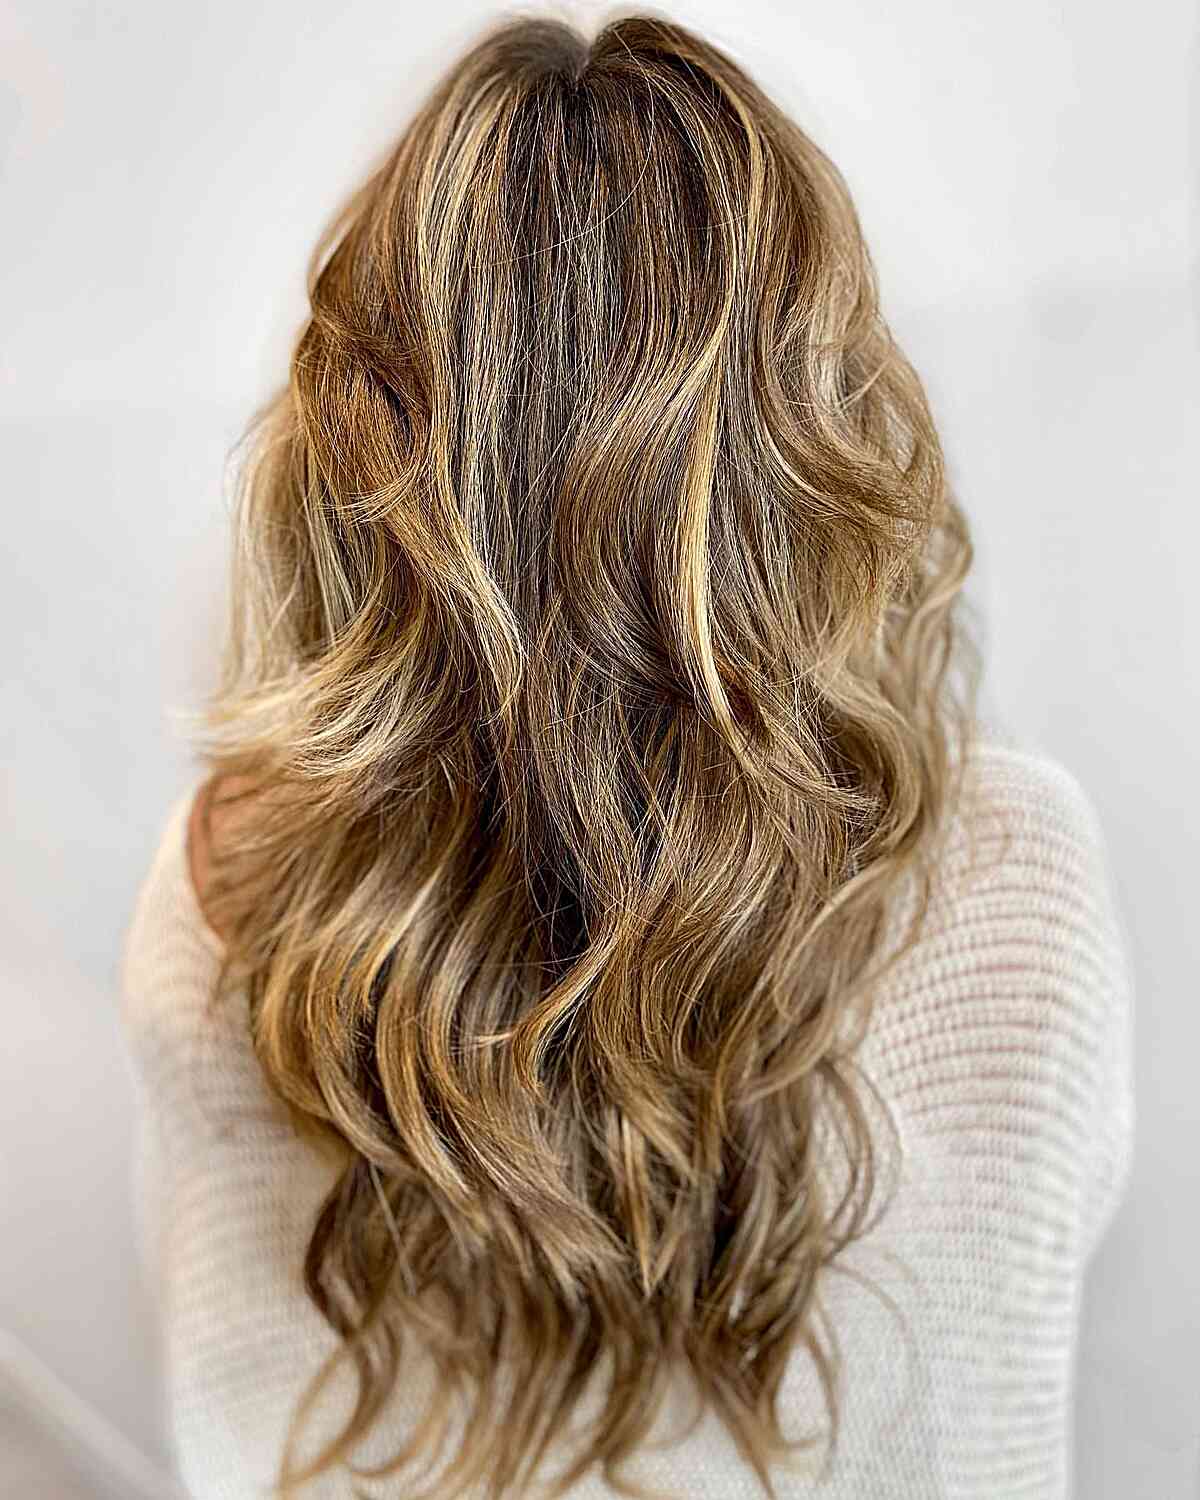 Long Dimensional Sun-Kissed Warm Blonde Balayage Hair with Messy Waves